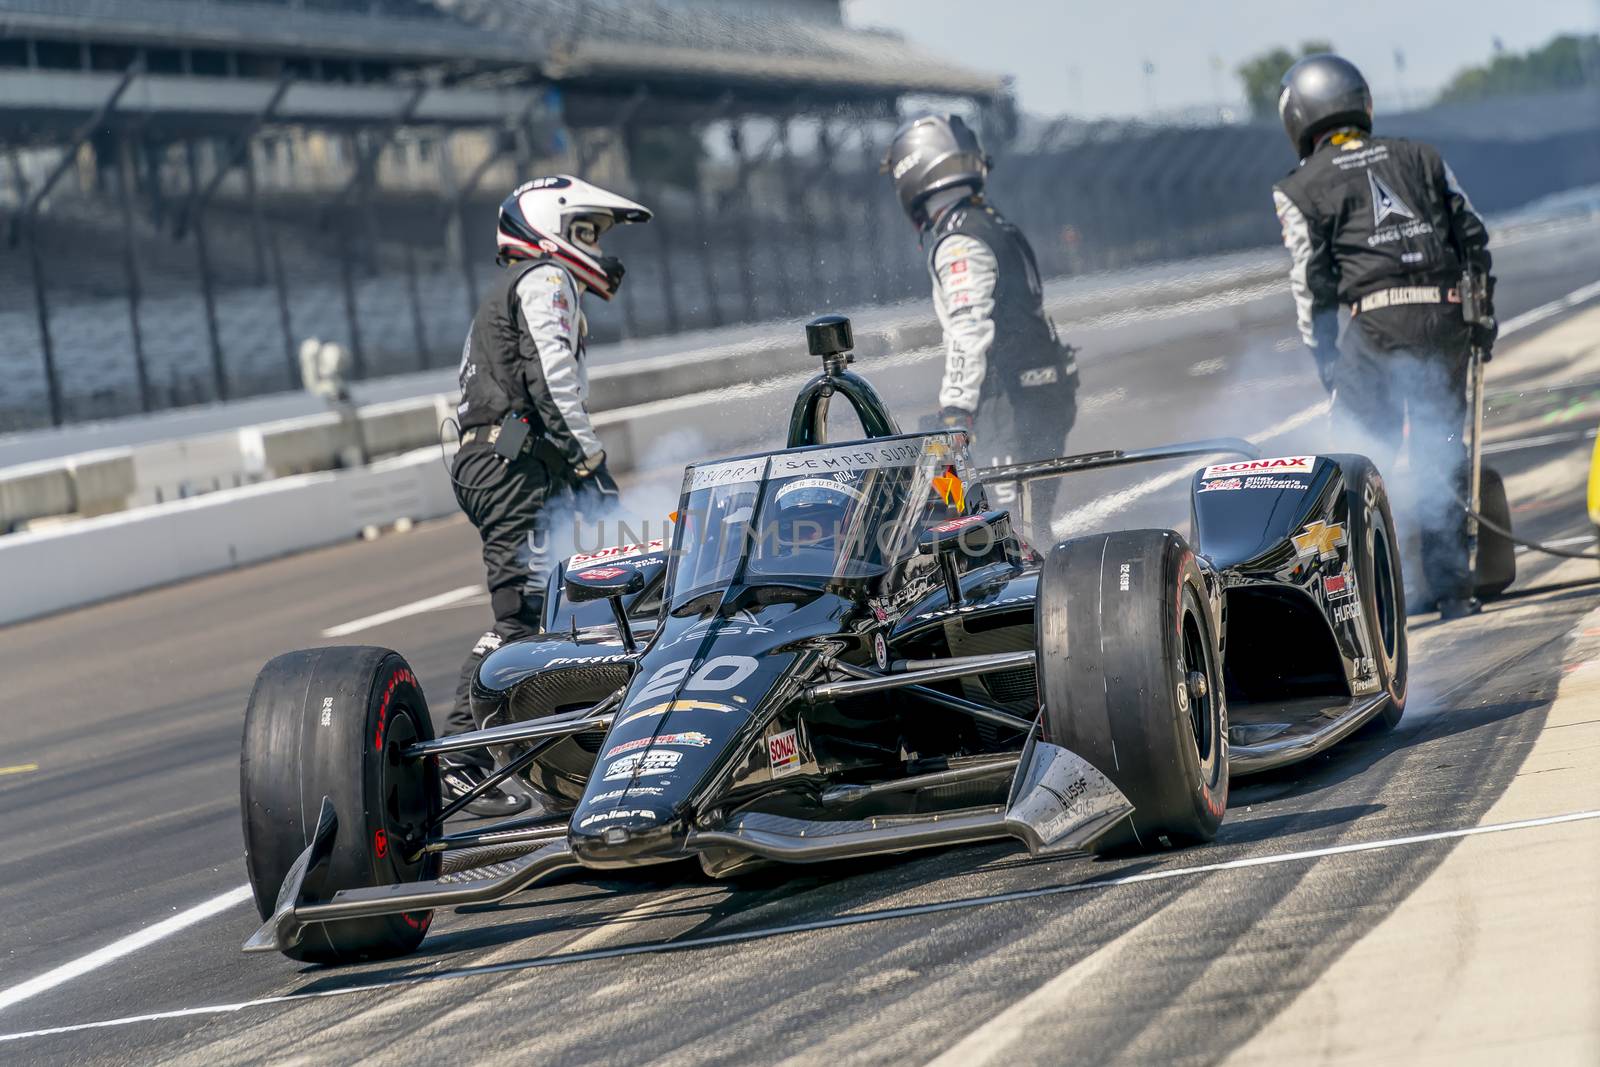 ED CARPENTER (20) Of the United States brings his car in for service during the Indianapolis 500 at Indianapolis Motor Speedway in Indianapolis Indiana.